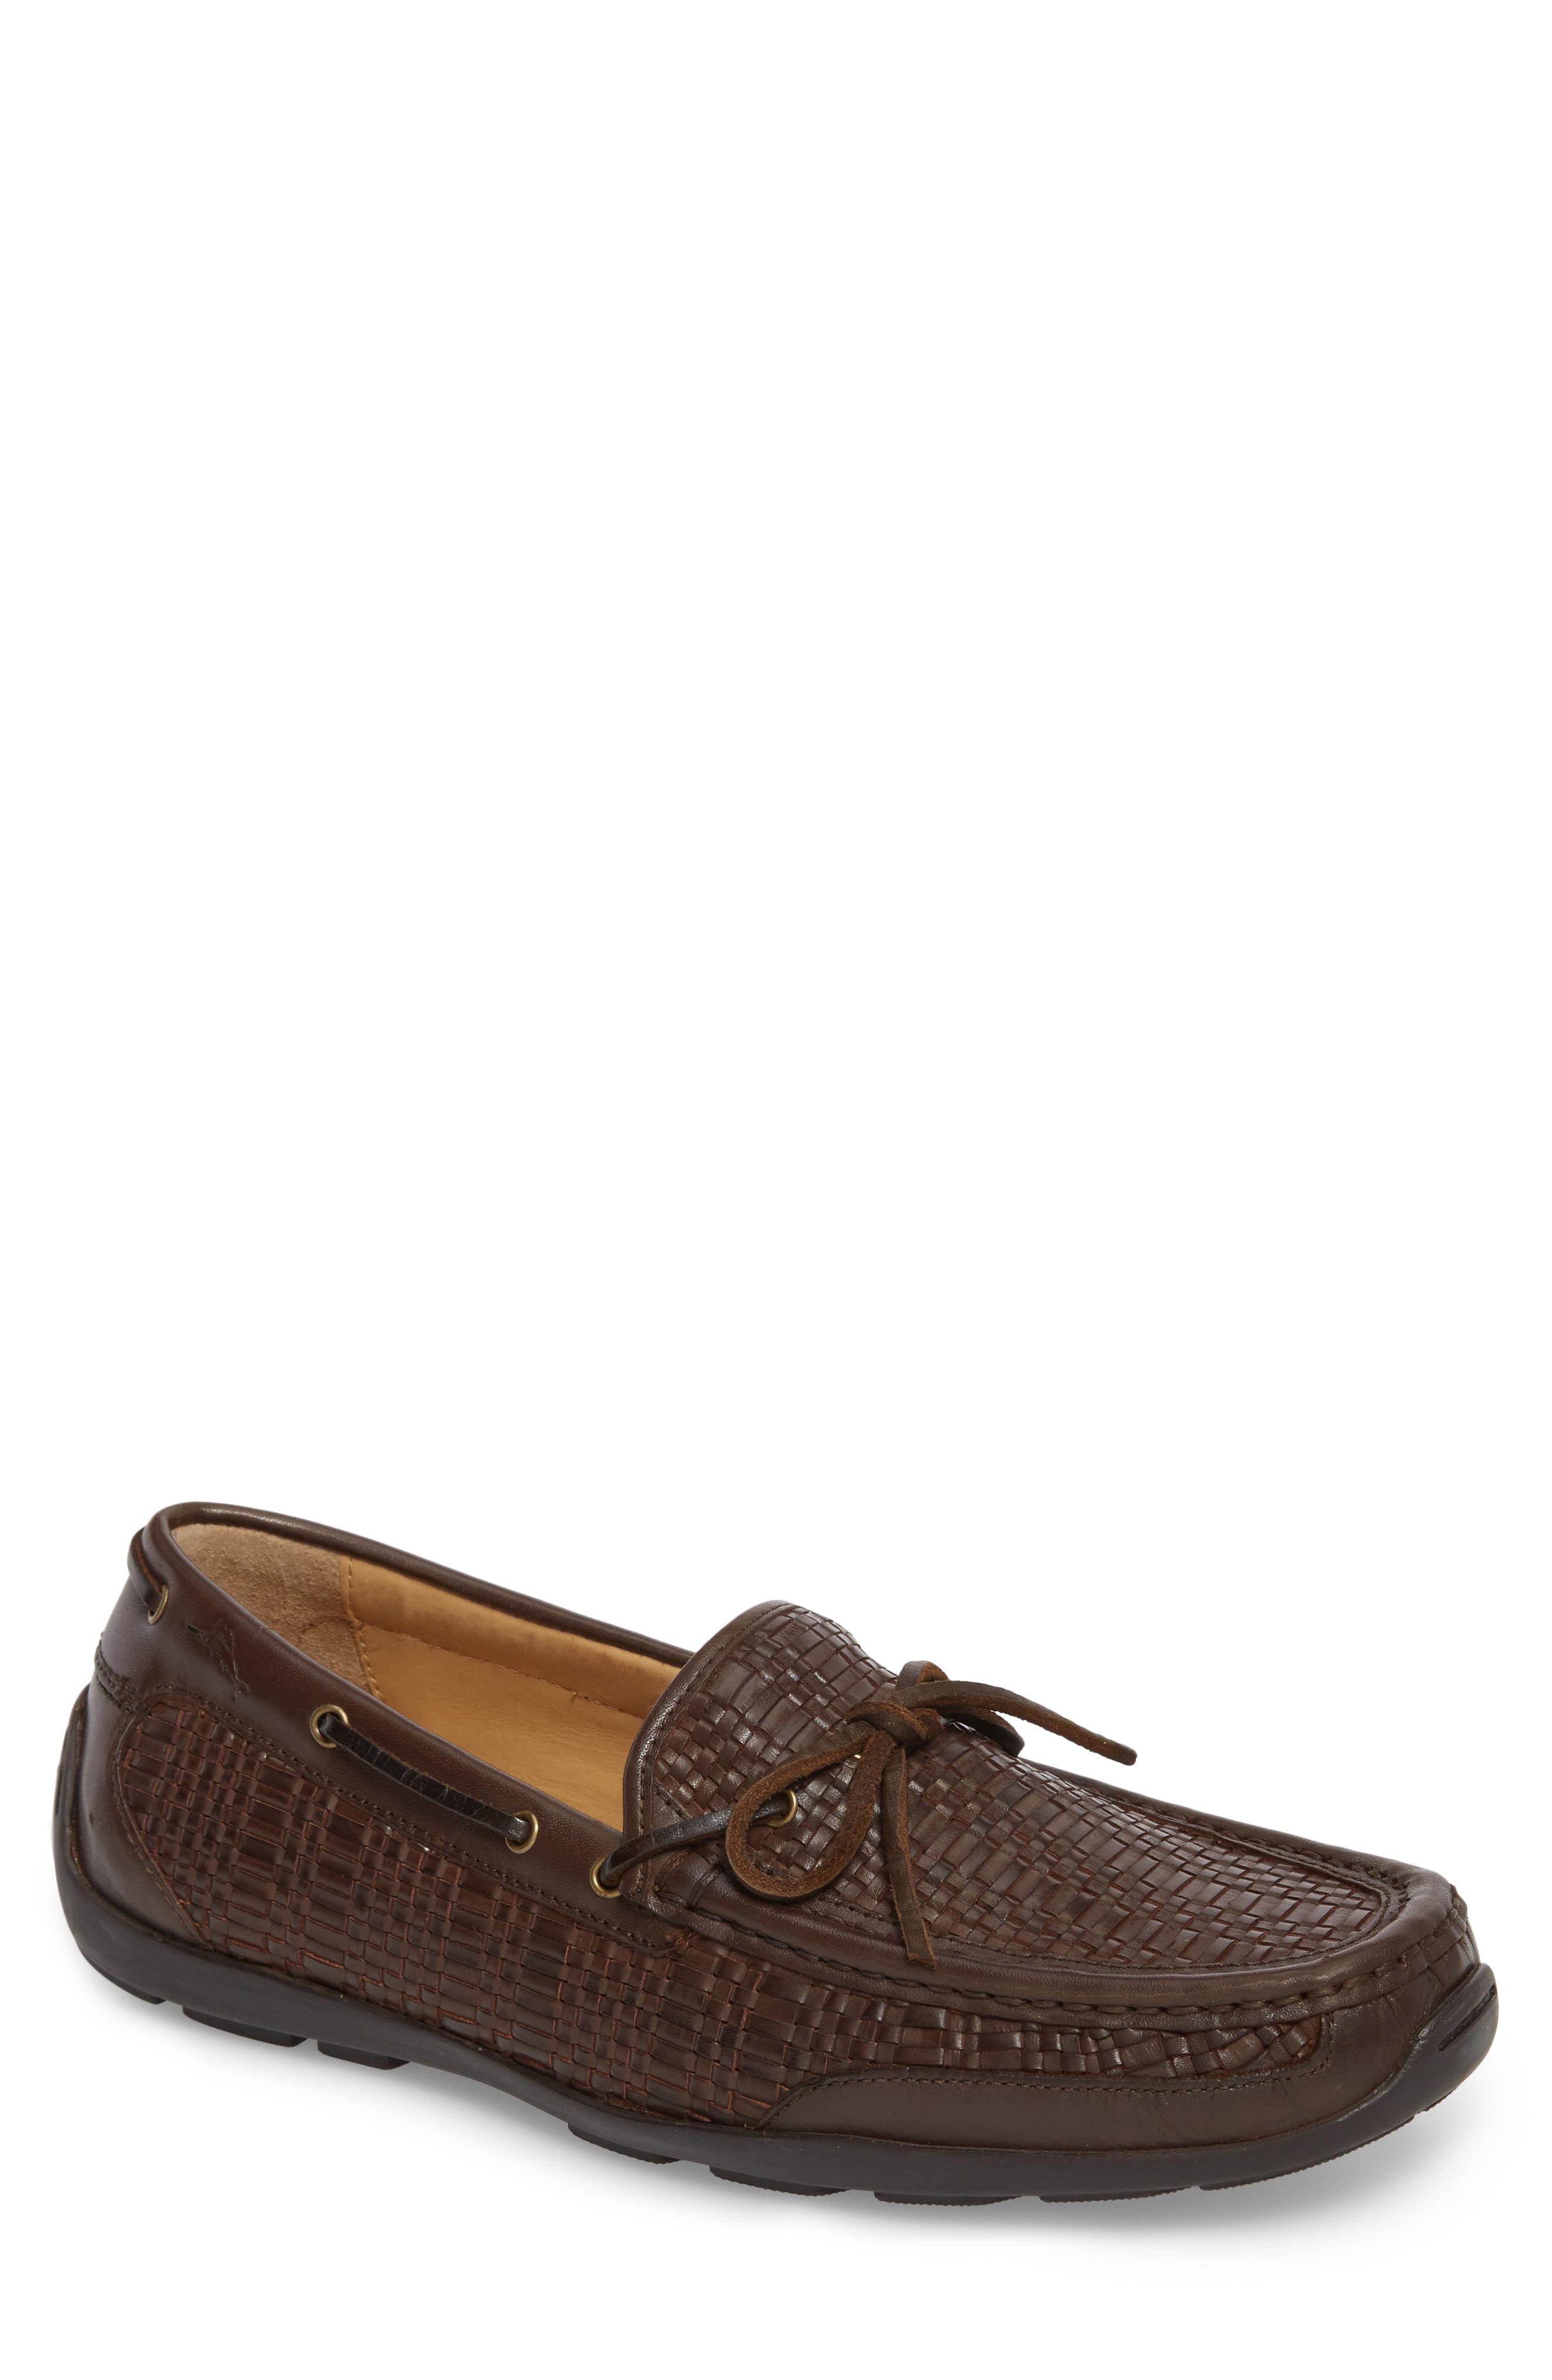 tommy bahama driving shoes